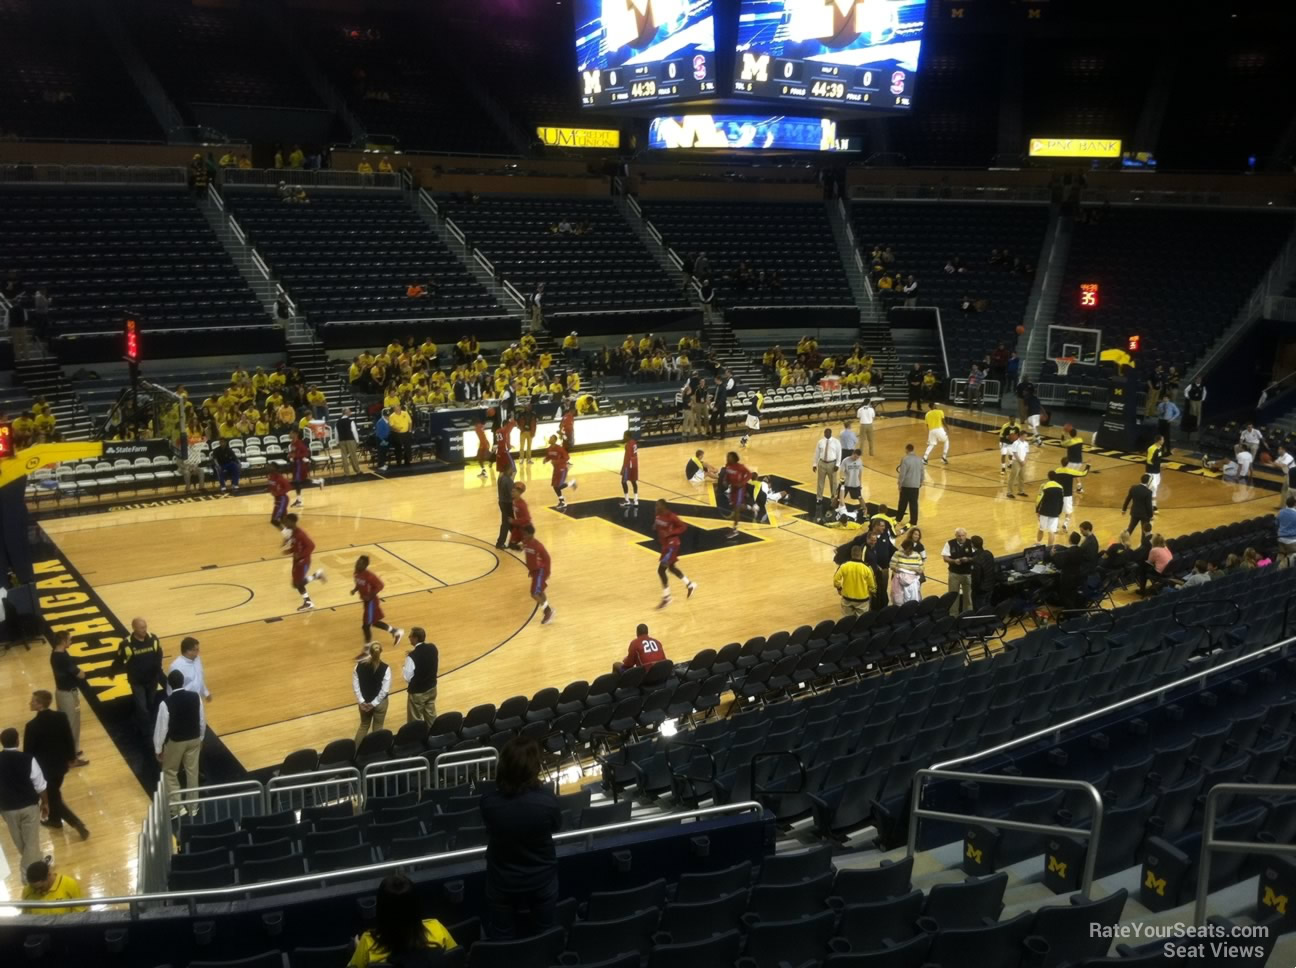 section 108, row 16 seat view  - crisler center